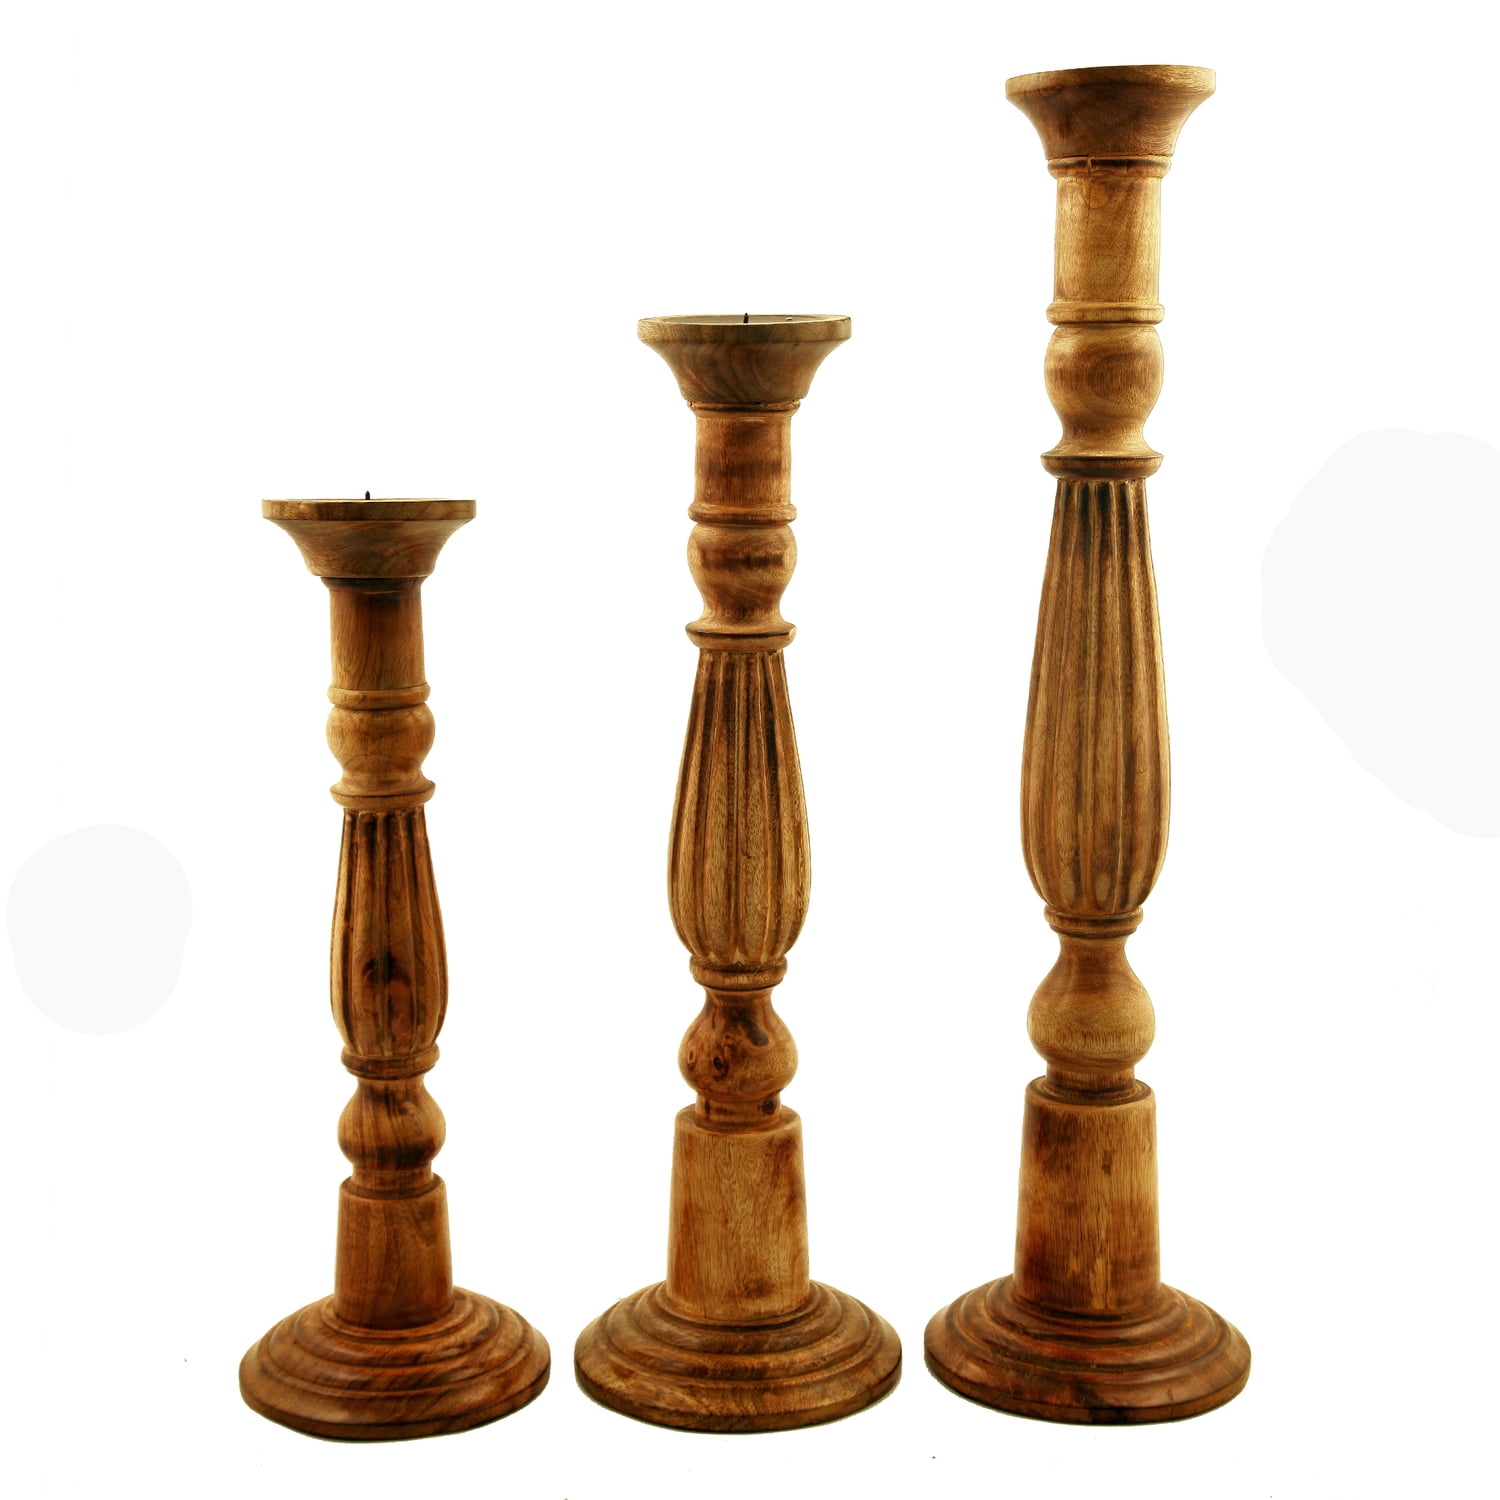 Bm81211 24 X 7 X 7 In. Wood Candle Holder, Set Of 3